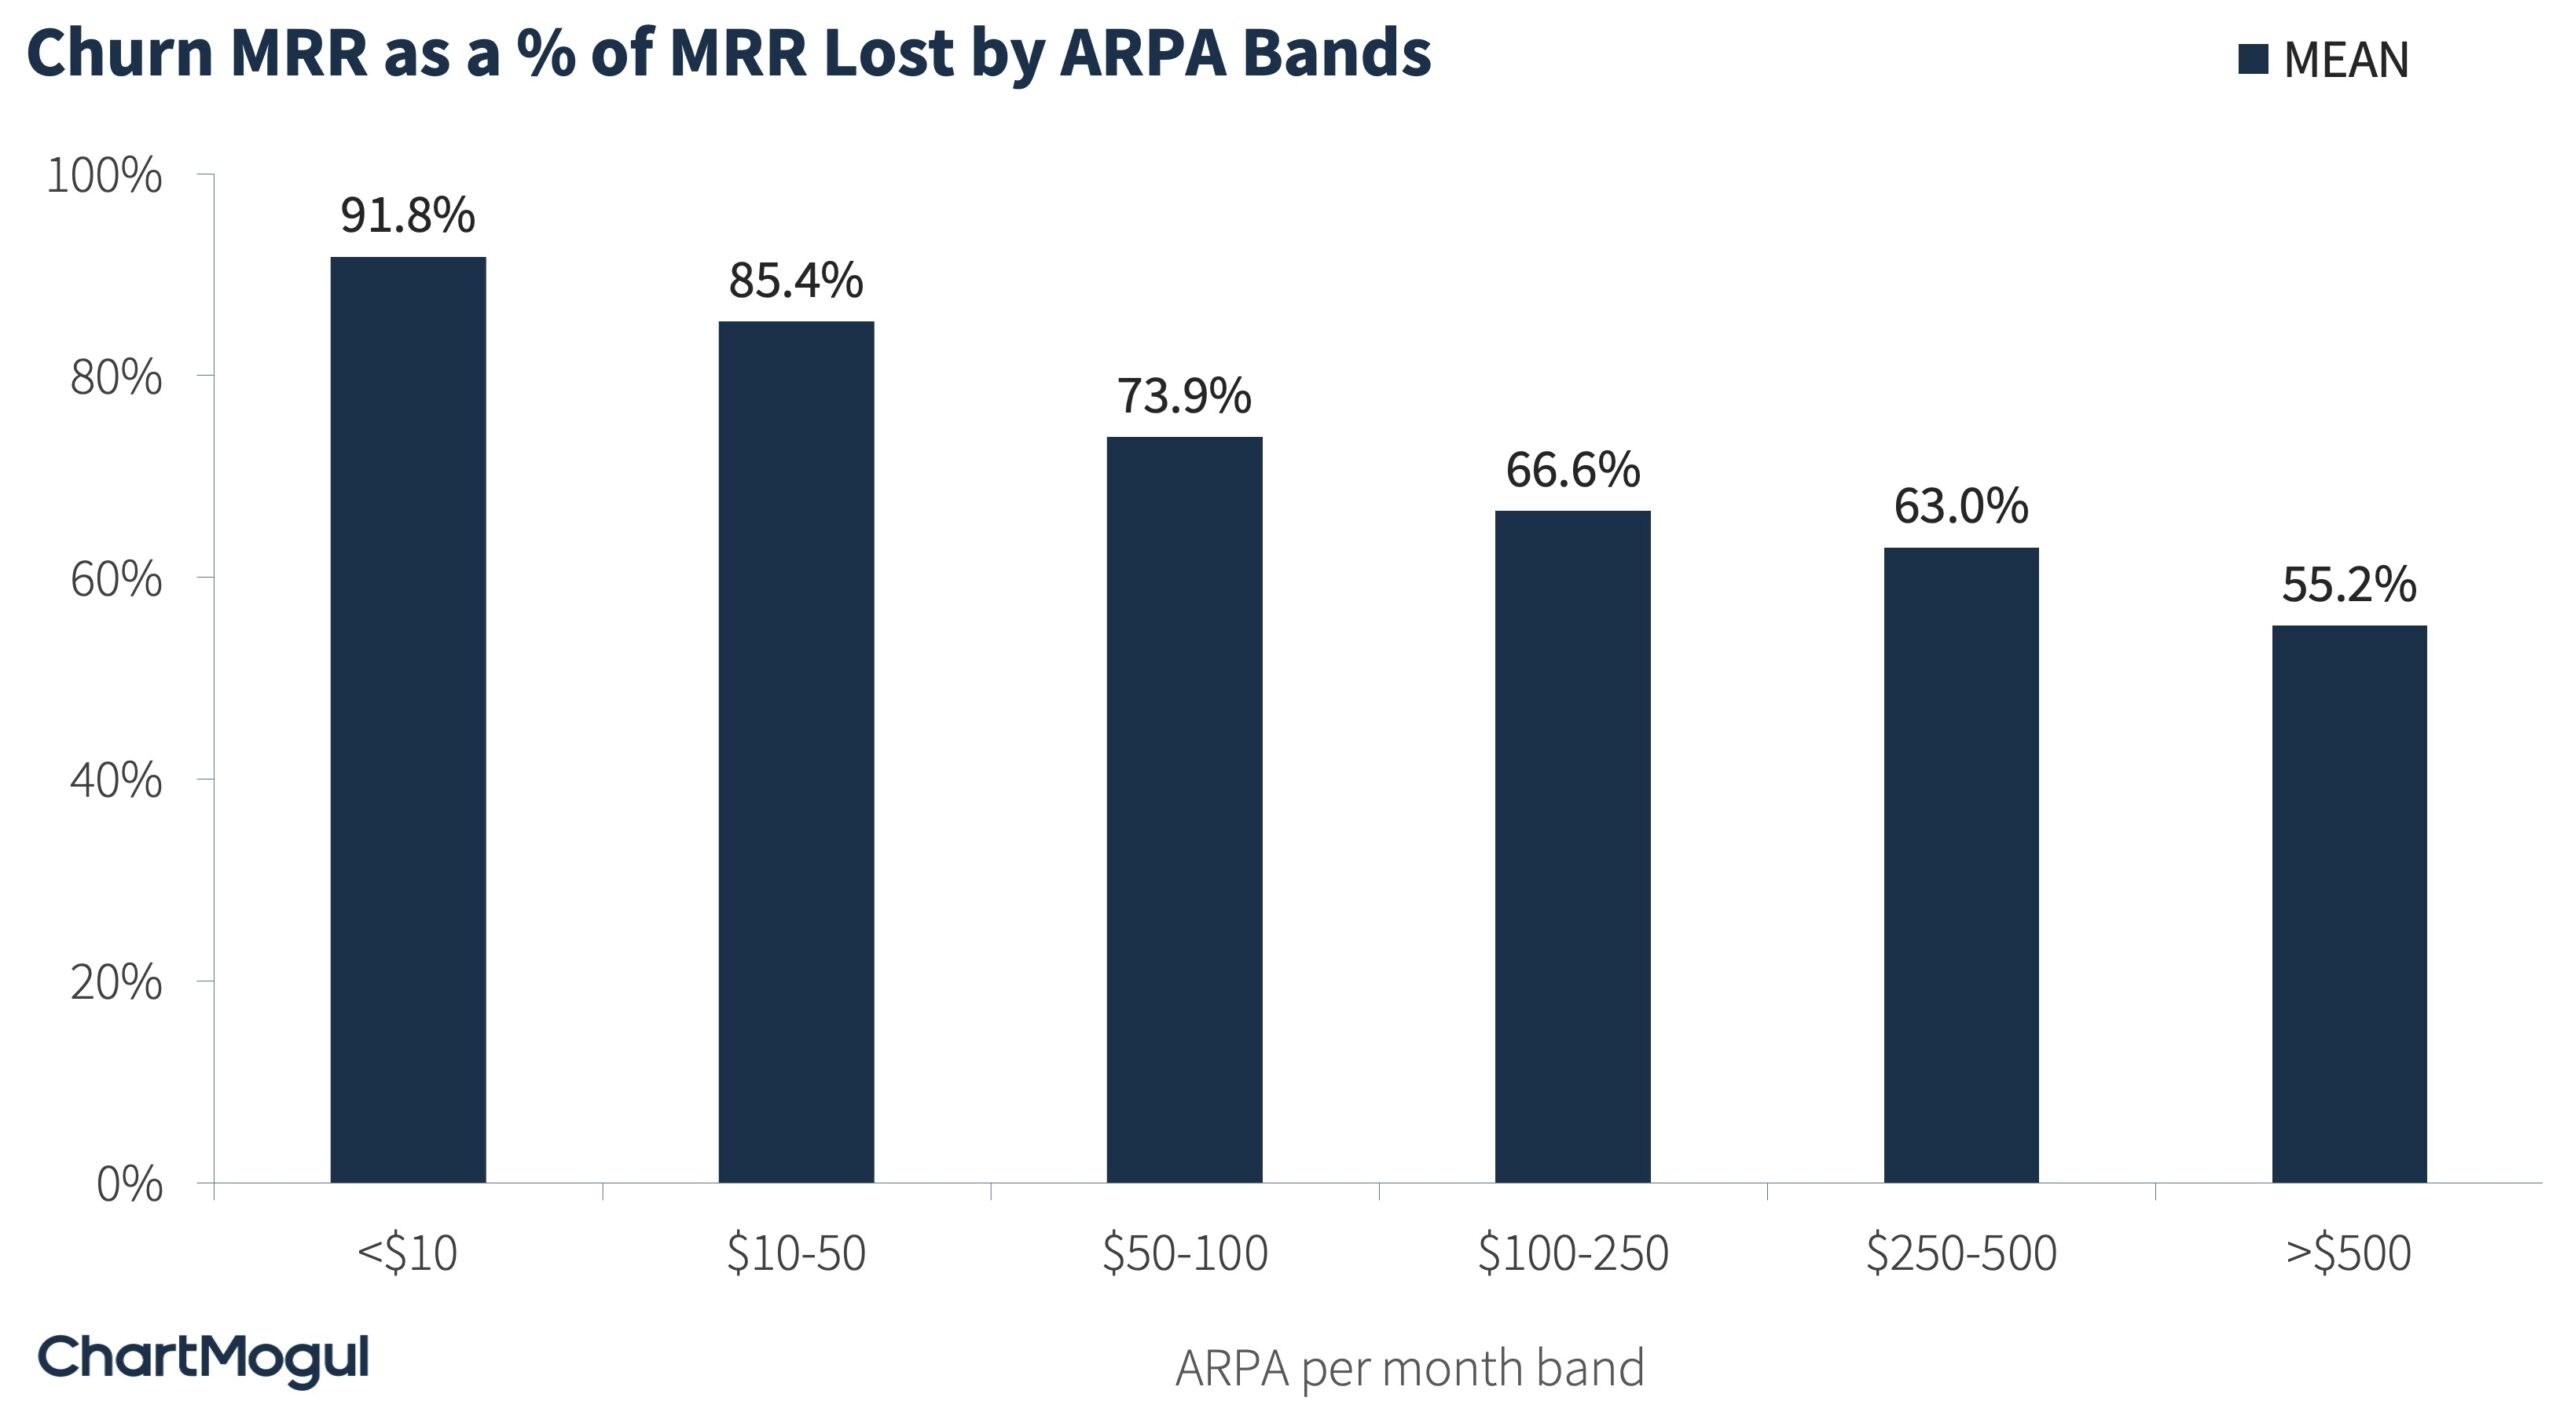 Churn MRR as a % of MRR Lost by ARPA Bands